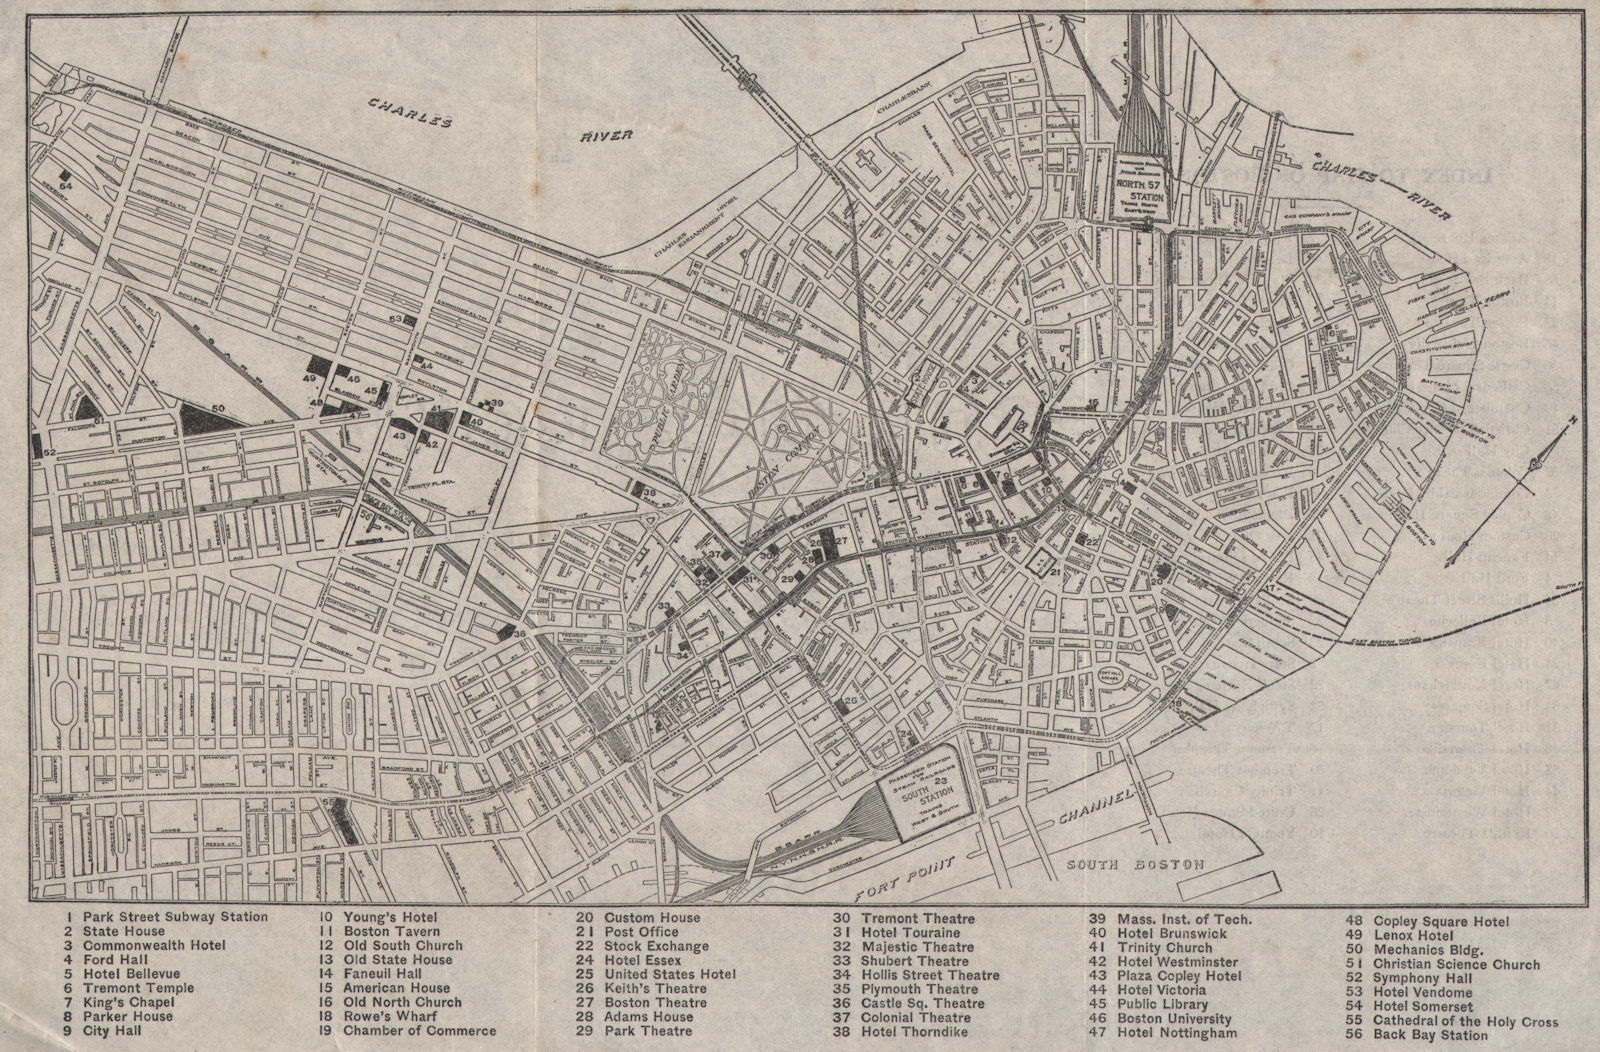 Associate Product BOSTON city plan showing public buildings, hotels & theatres c1916 old map